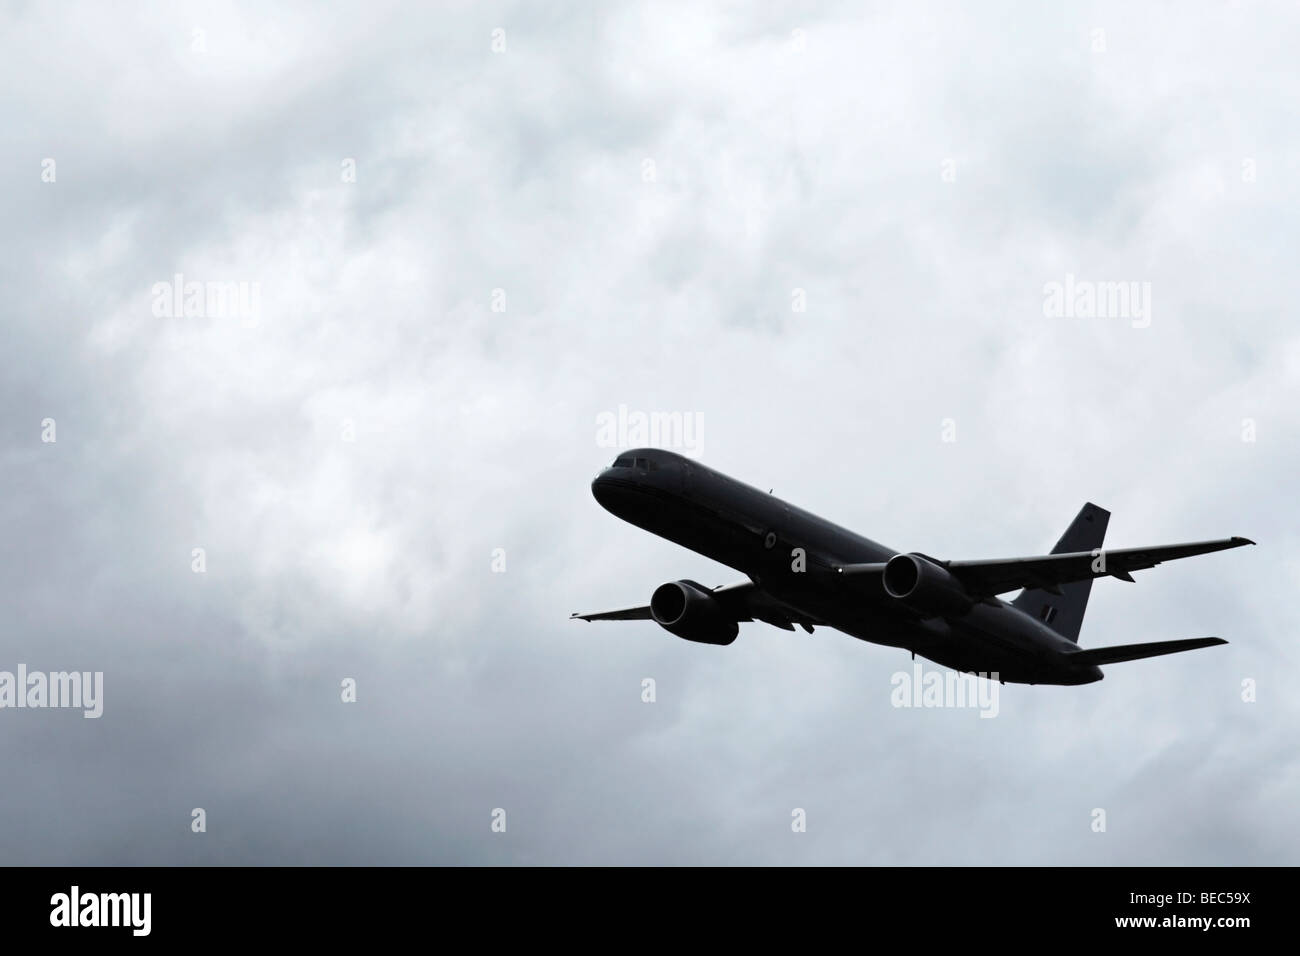 Royal New Zealand Air Force Boeing 757-200 Military Aircraft in Flight Stock Photo